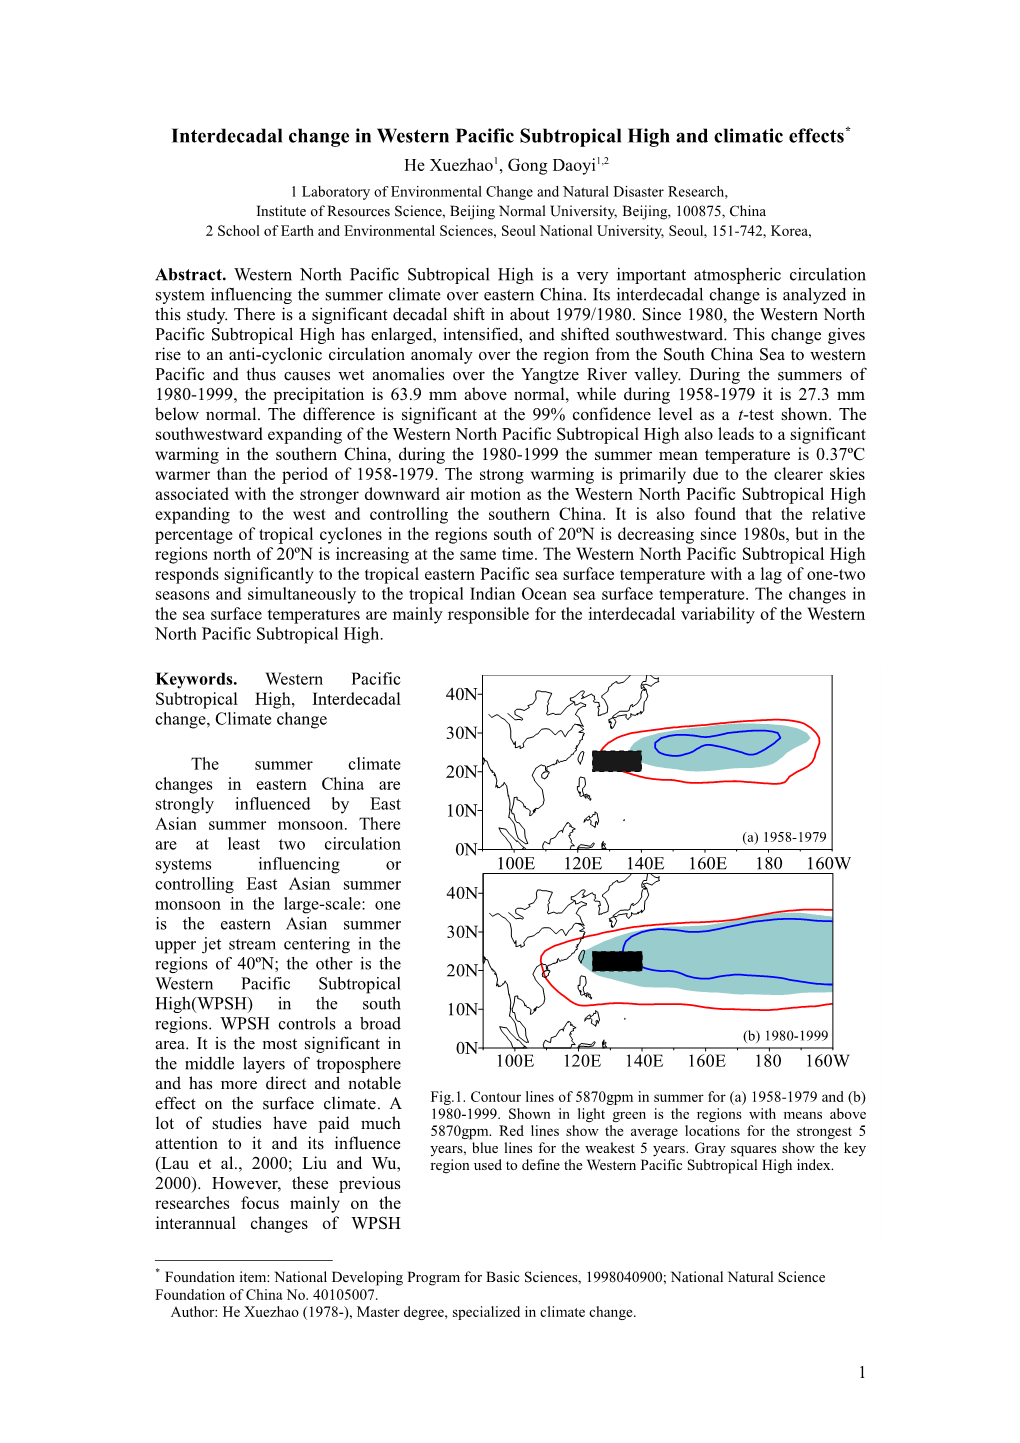 Interdecadal Change in Western Pacific Subtropical High and Climatic Effects *